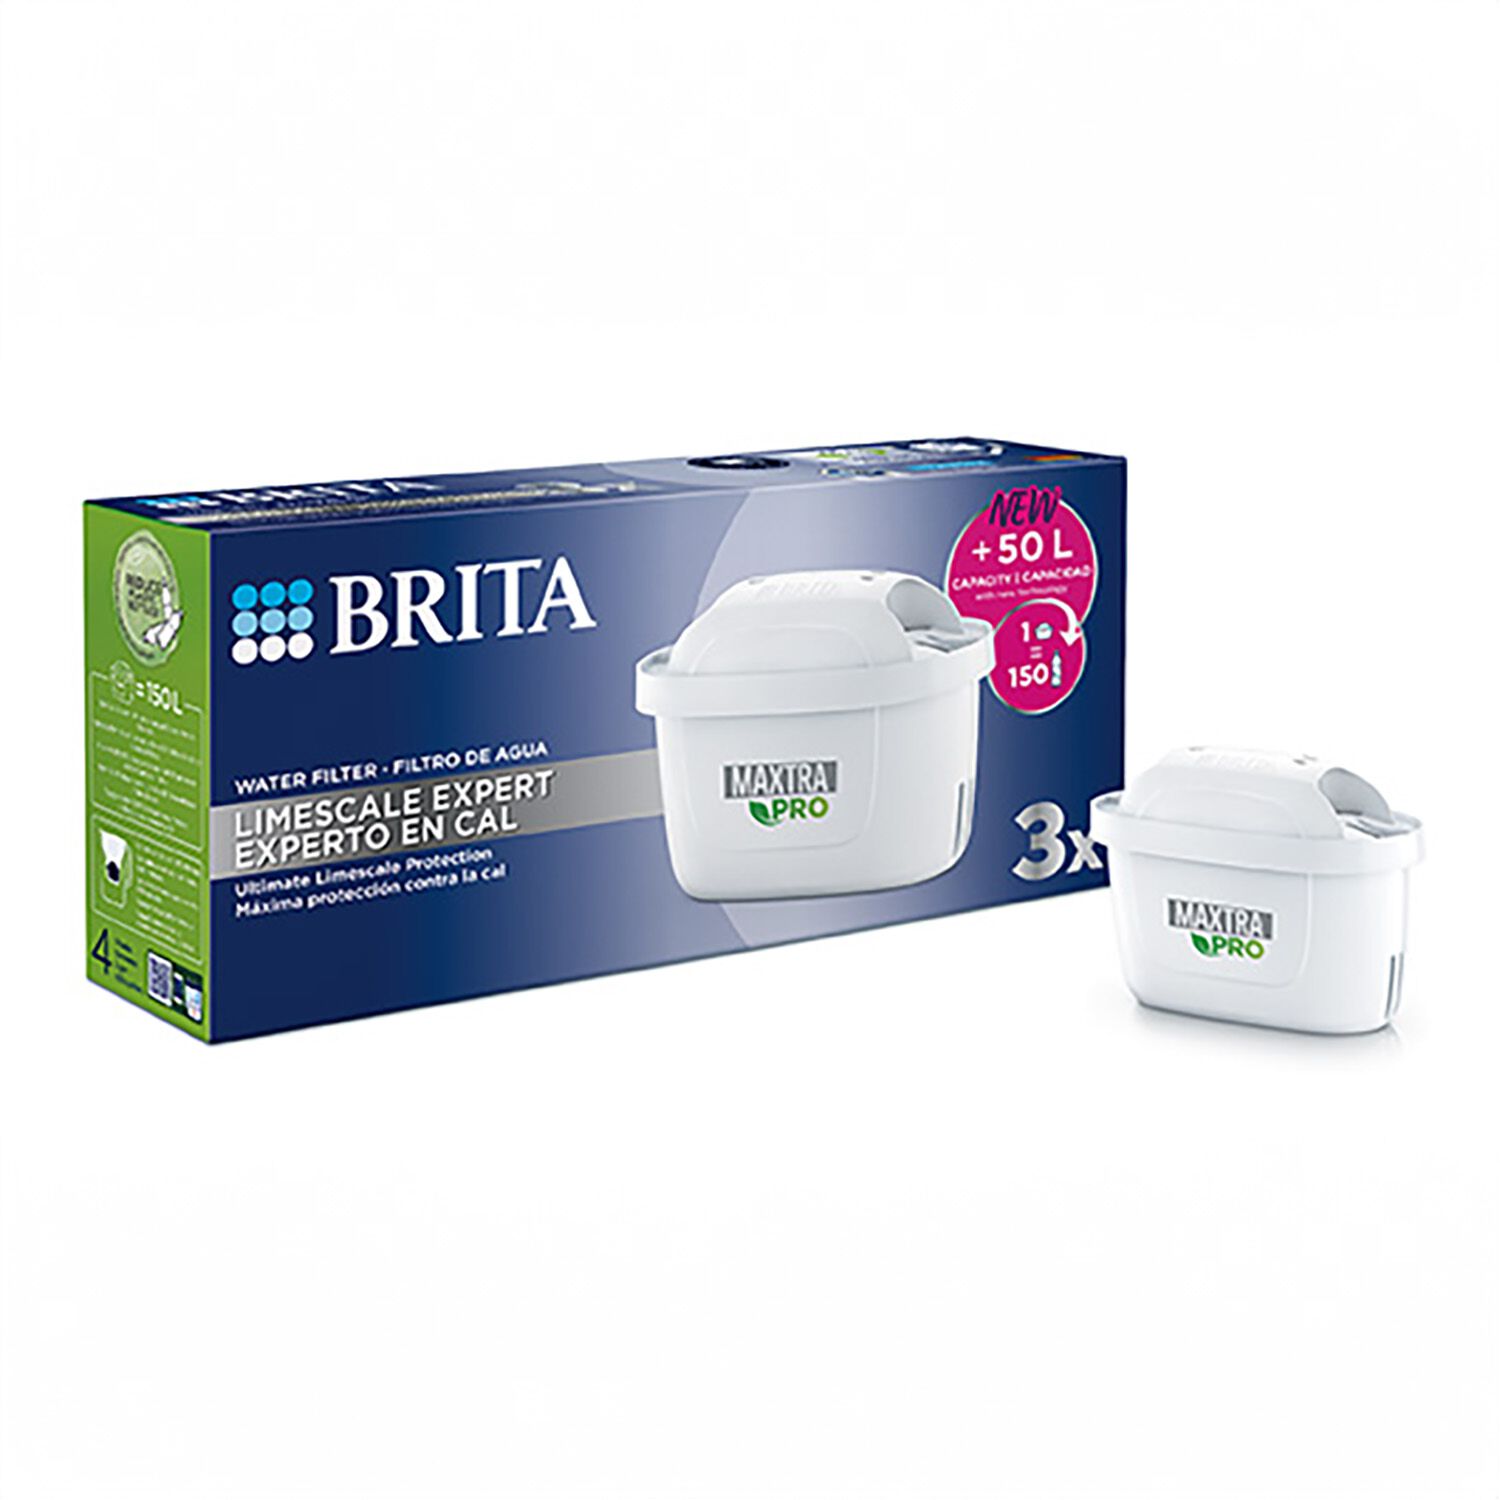 BRITA Maxtra Pro All-In-1 Water Filter Cartridge, Pack of 3